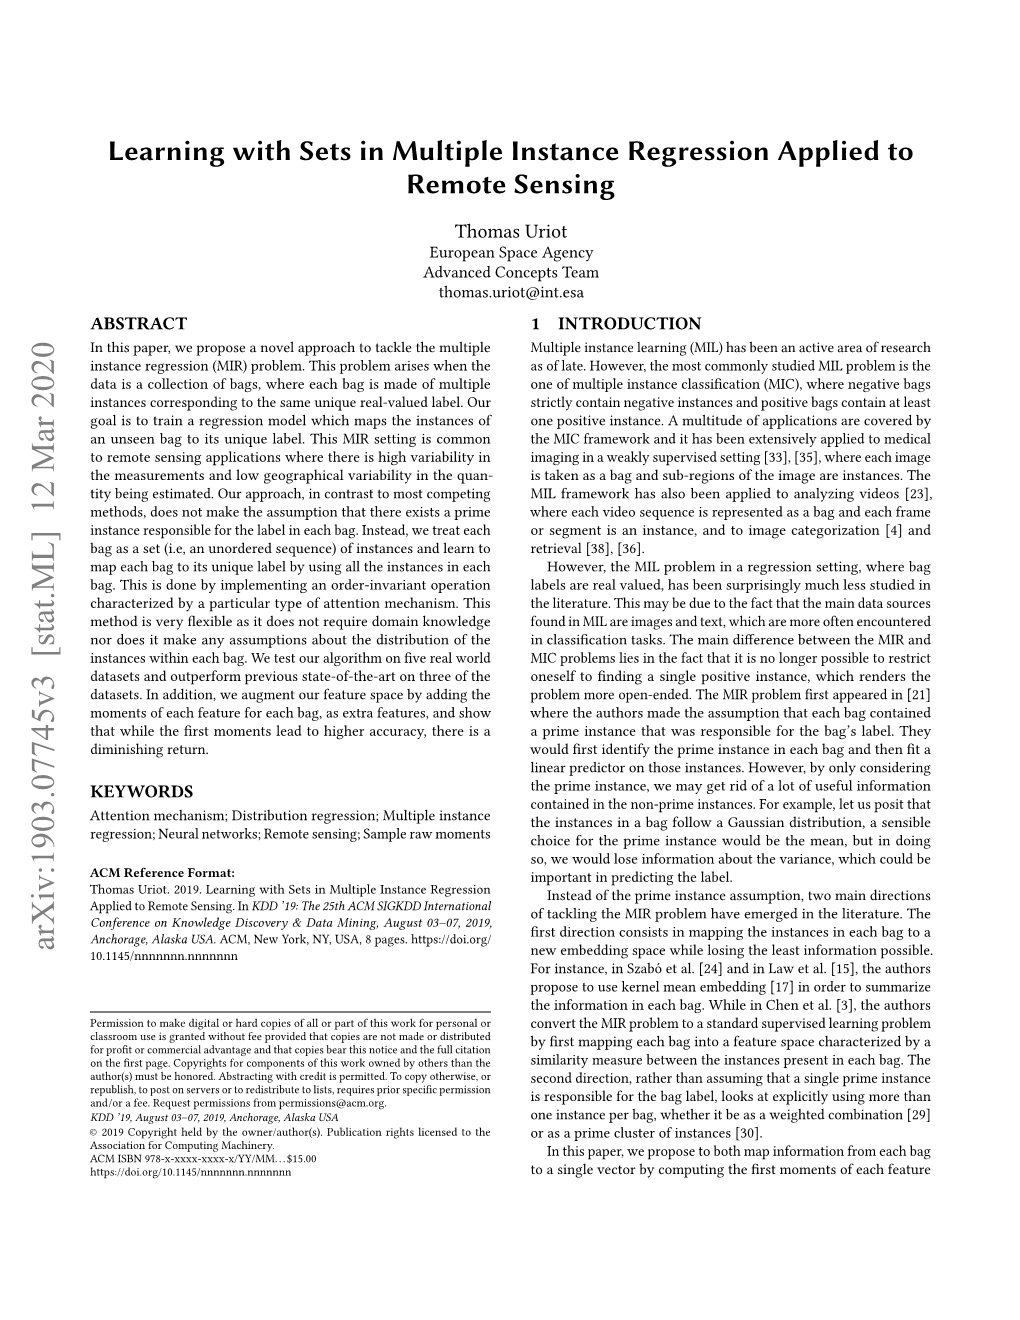 Learning with Sets in Multiple Instance Regression Applied to Remote Sensing